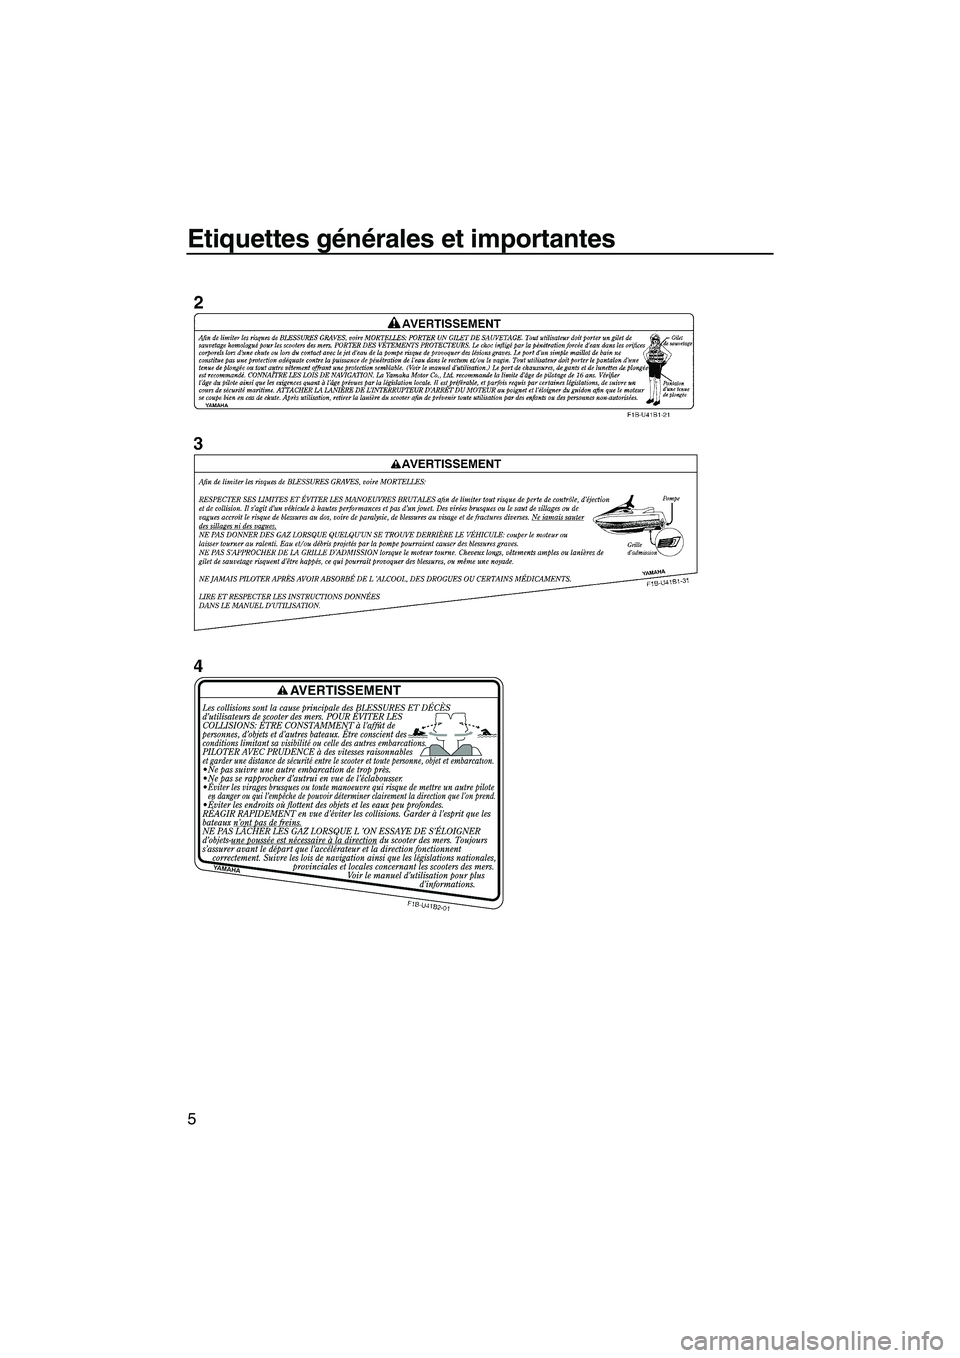 YAMAHA FX HO CRUISER 2007  Notices Demploi (in French) Etiquettes générales et importantes
5
UF1X71F0.book  Page 5  Wednesday, September 27, 2006  1:04 PM 